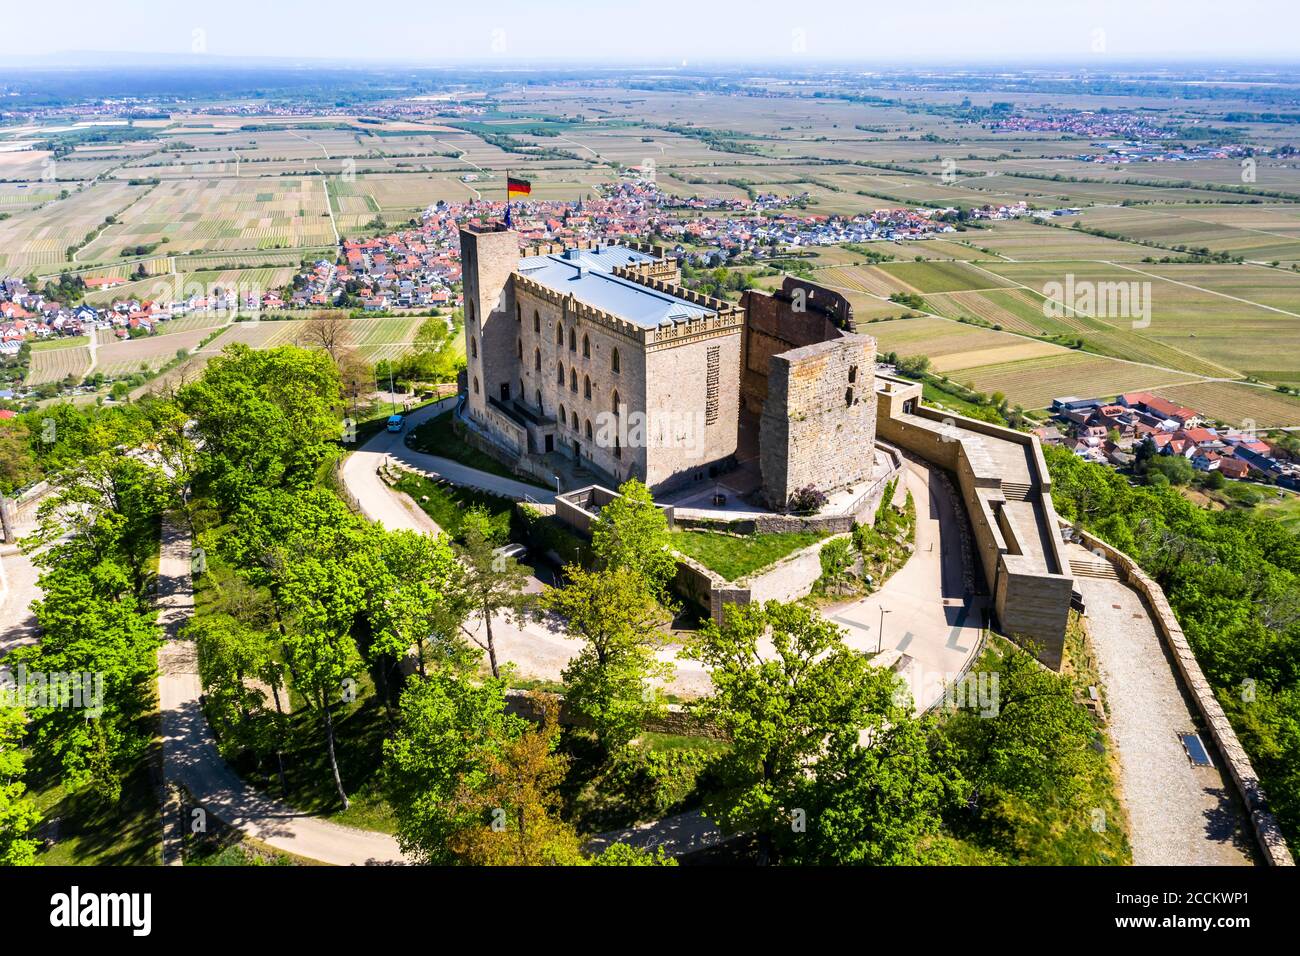 Germany, Rhineland-Palatinate, Neustadt an der Weinstrasse, Helicopter view of Hambach Castle in summer Stock Photo